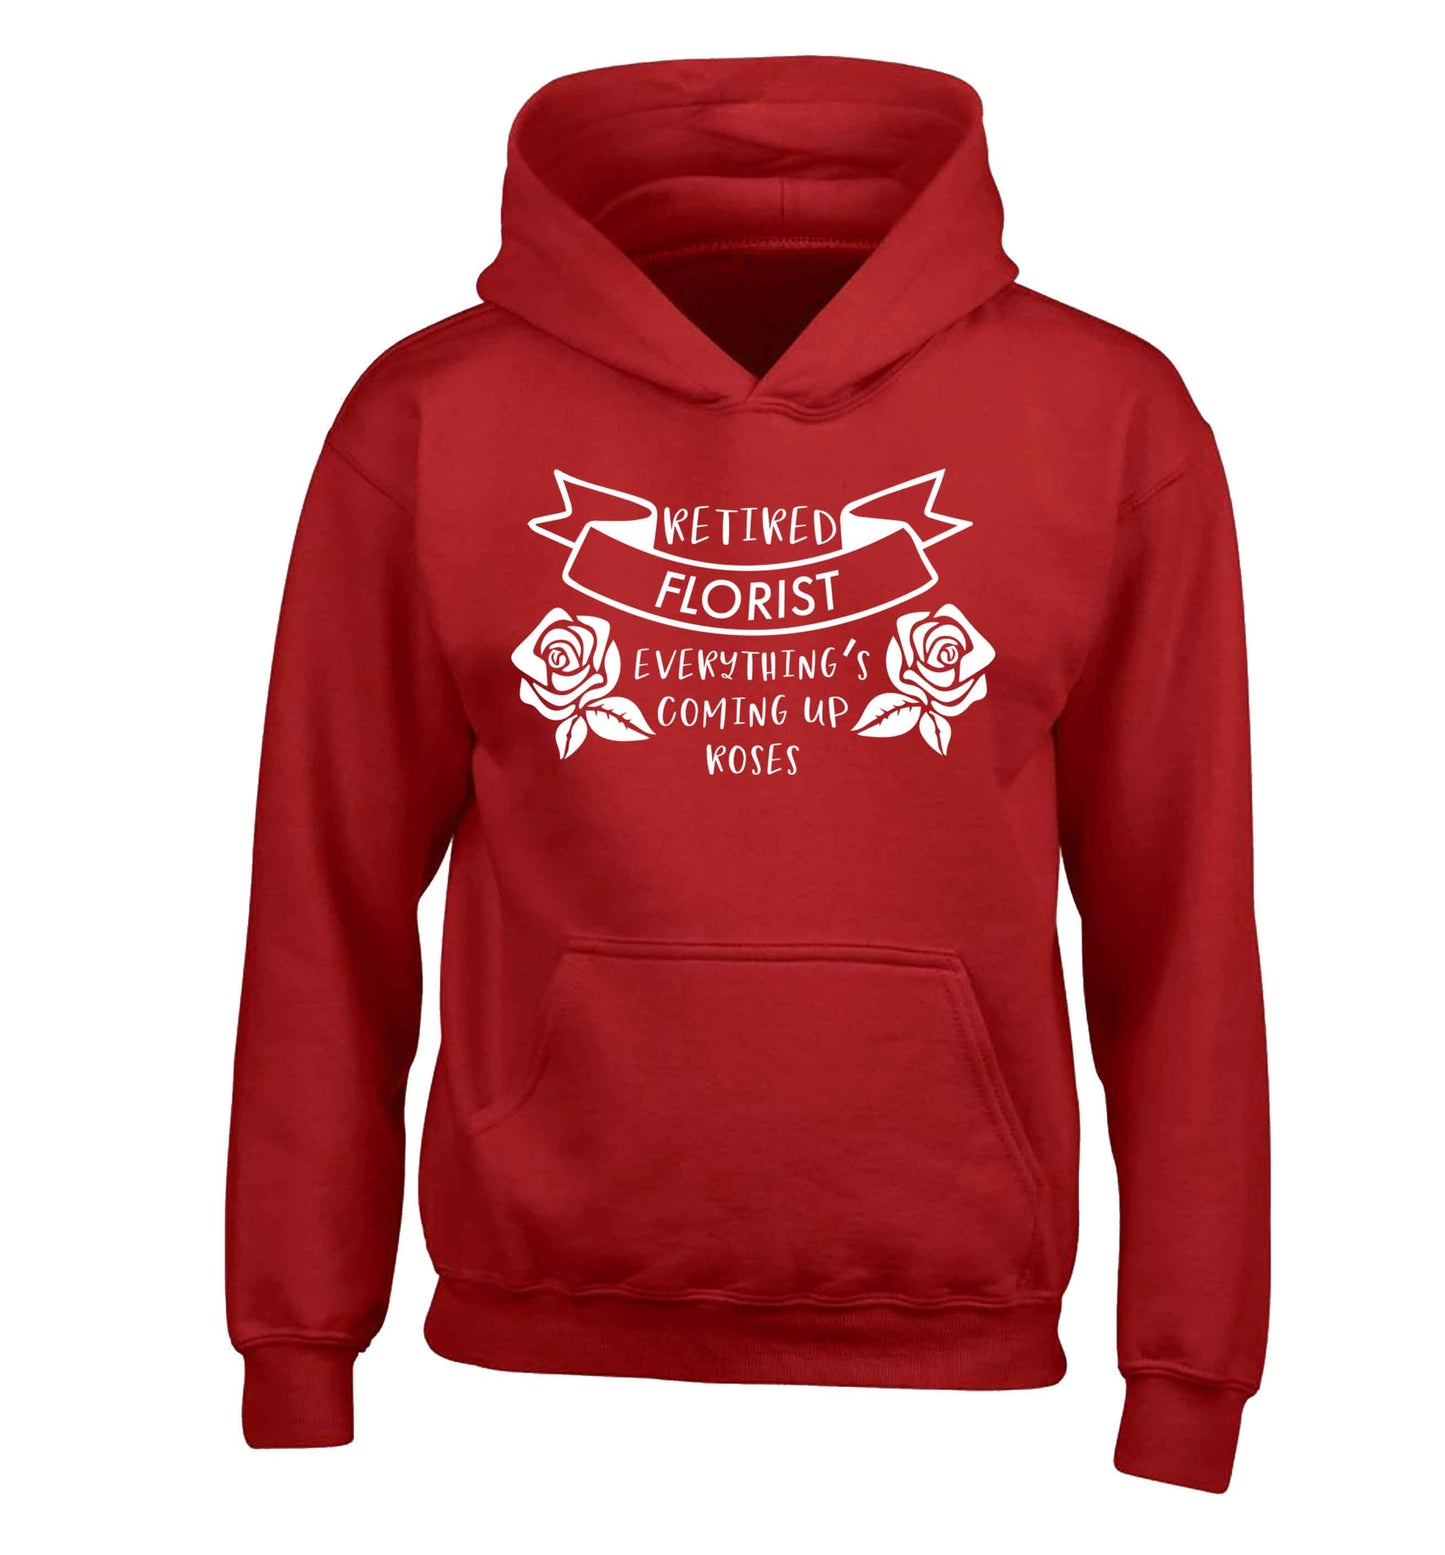 Retired florist everything's coming up roses children's red hoodie 12-13 Years